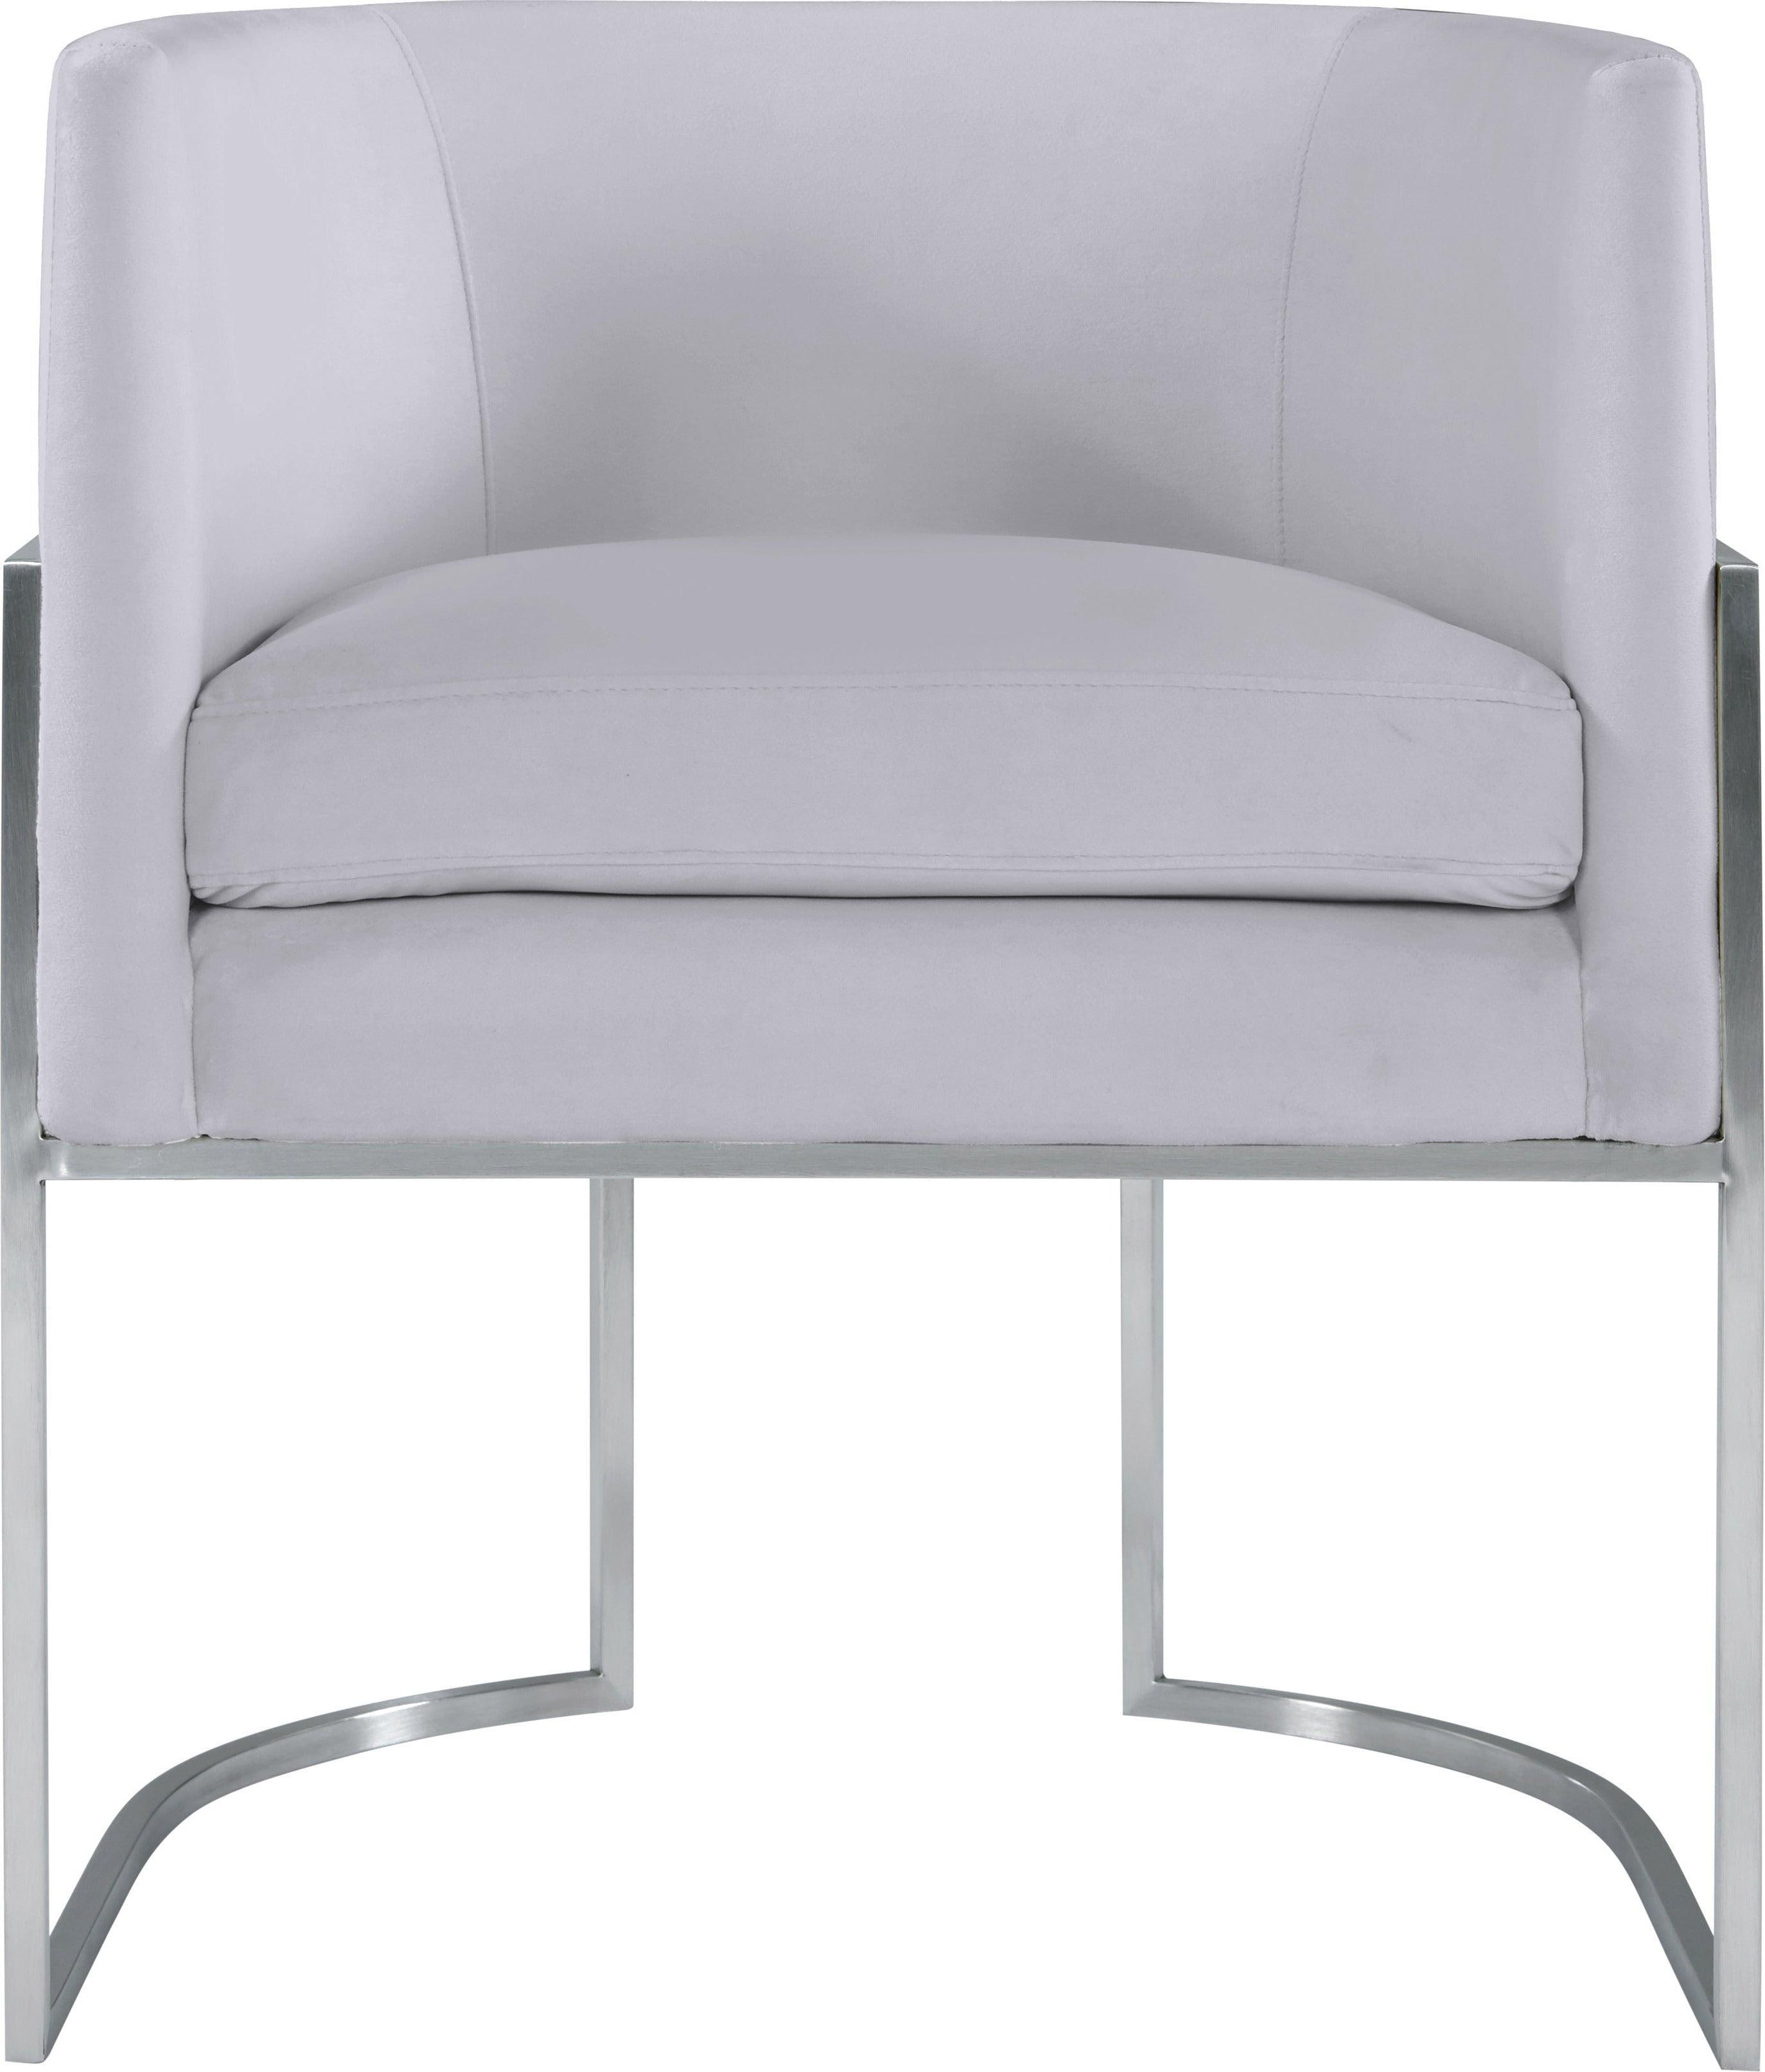 Tov Furniture Dining Chairs - Giselle Gray Velvet Dining Chair with Silver Leg